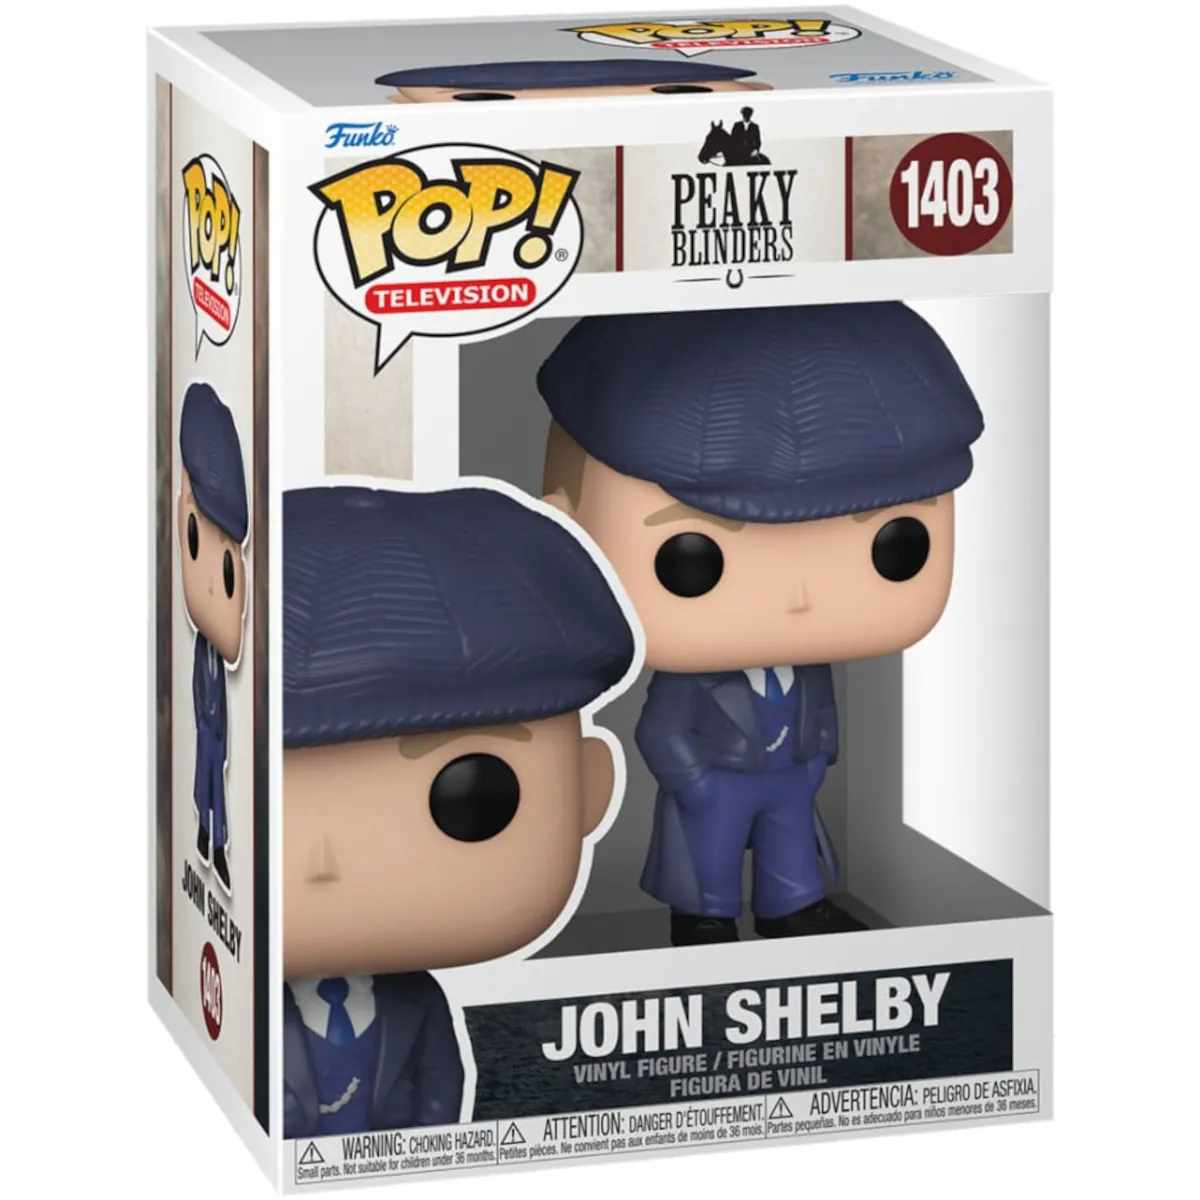 Funko Pop Television Peaky Blinders John Shelby Collectable Vinyl Figure Box